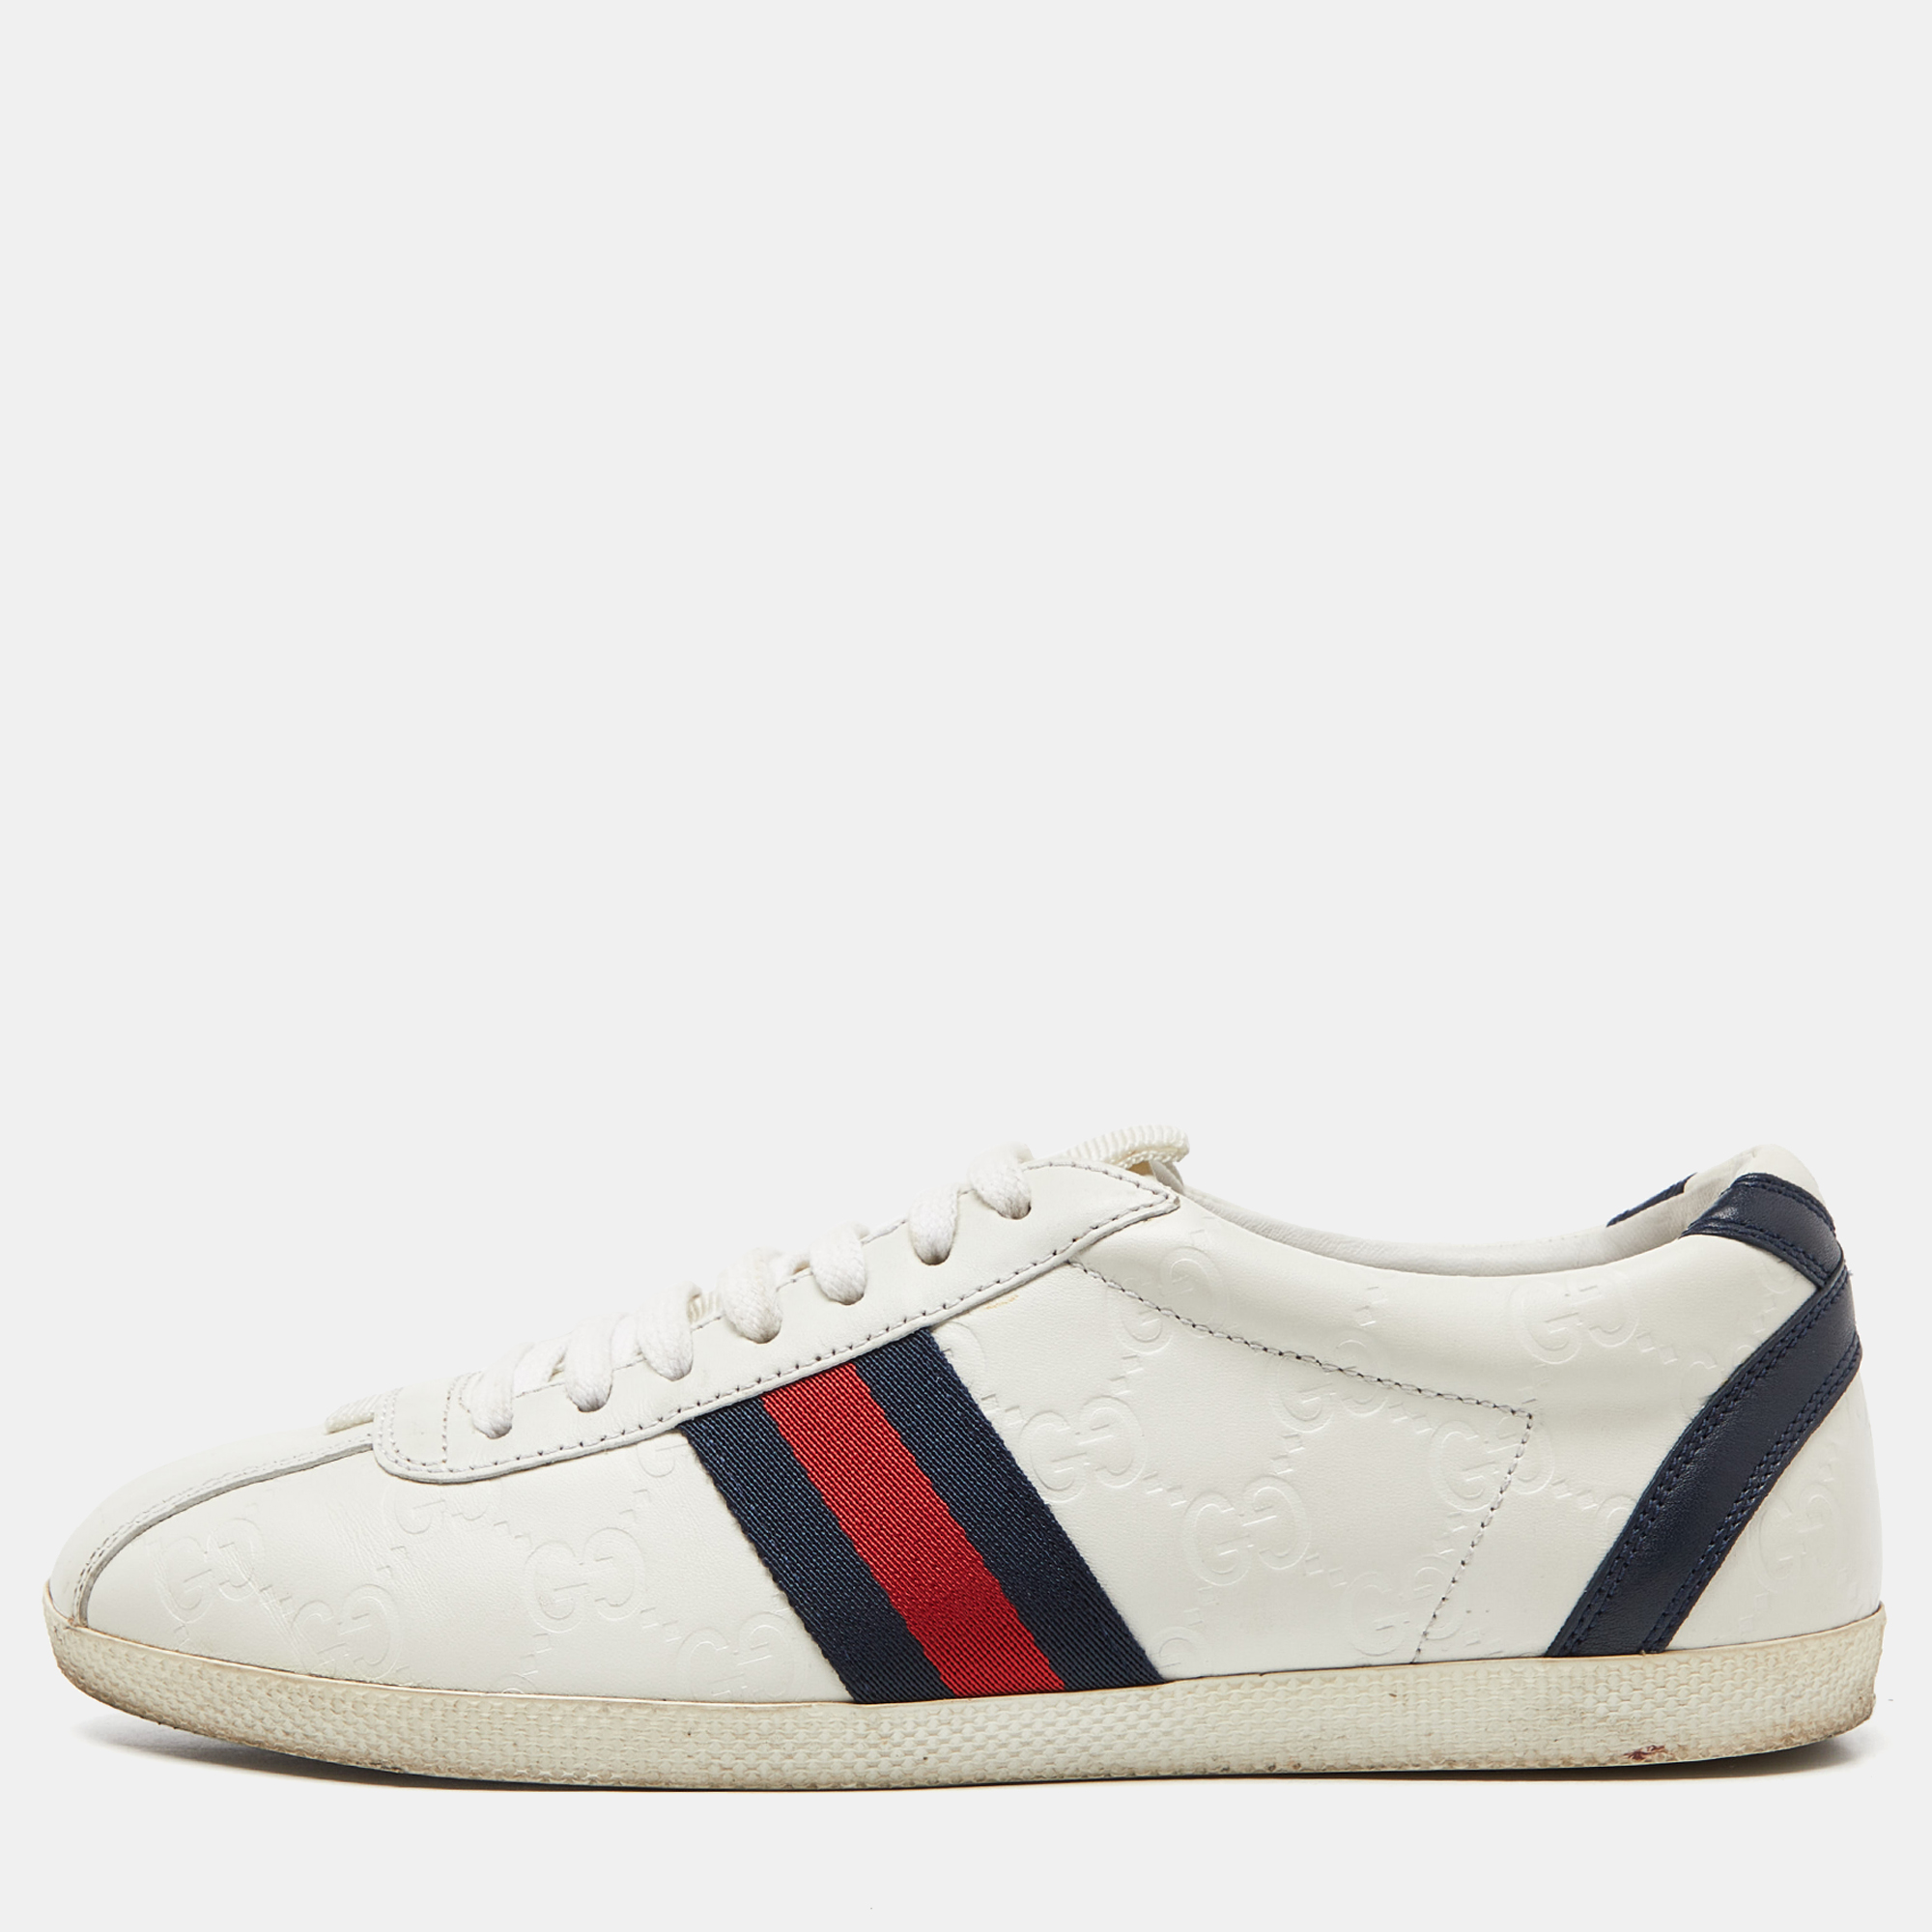 Give your outfit a luxe update with this pair of Gucci sneakers. The shoes are sewn perfectly to help you make a statement in them for a long time.